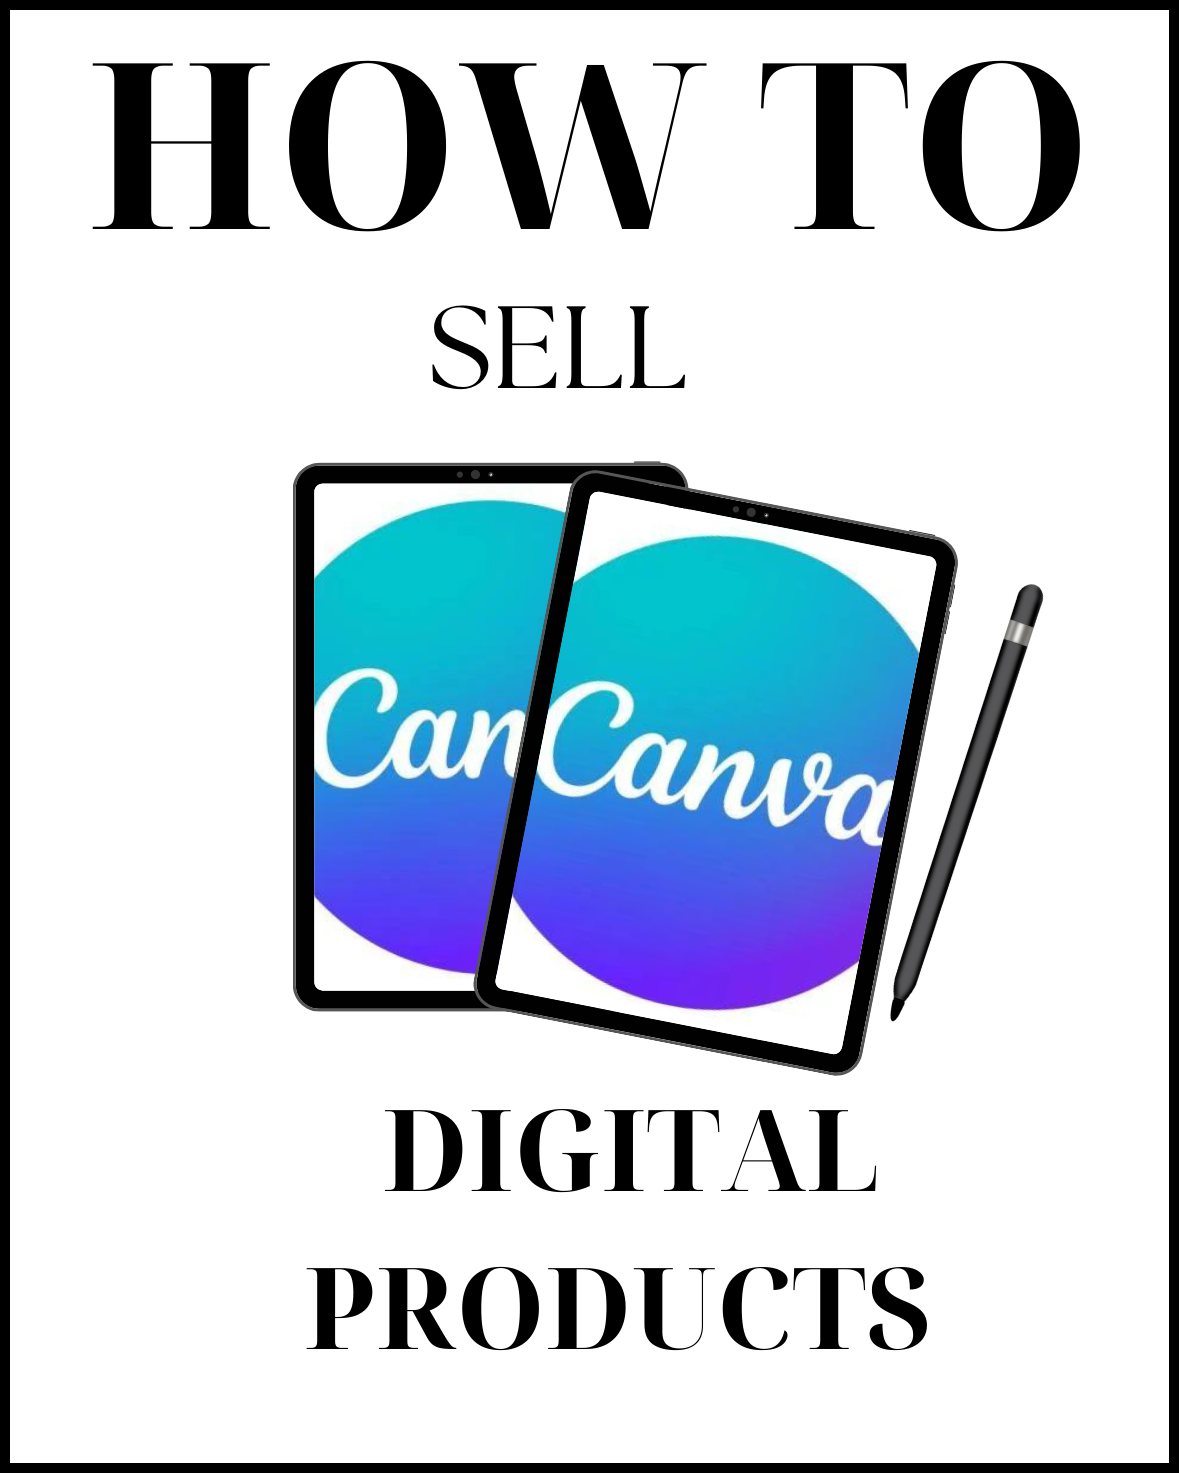 How to Start selling digital products